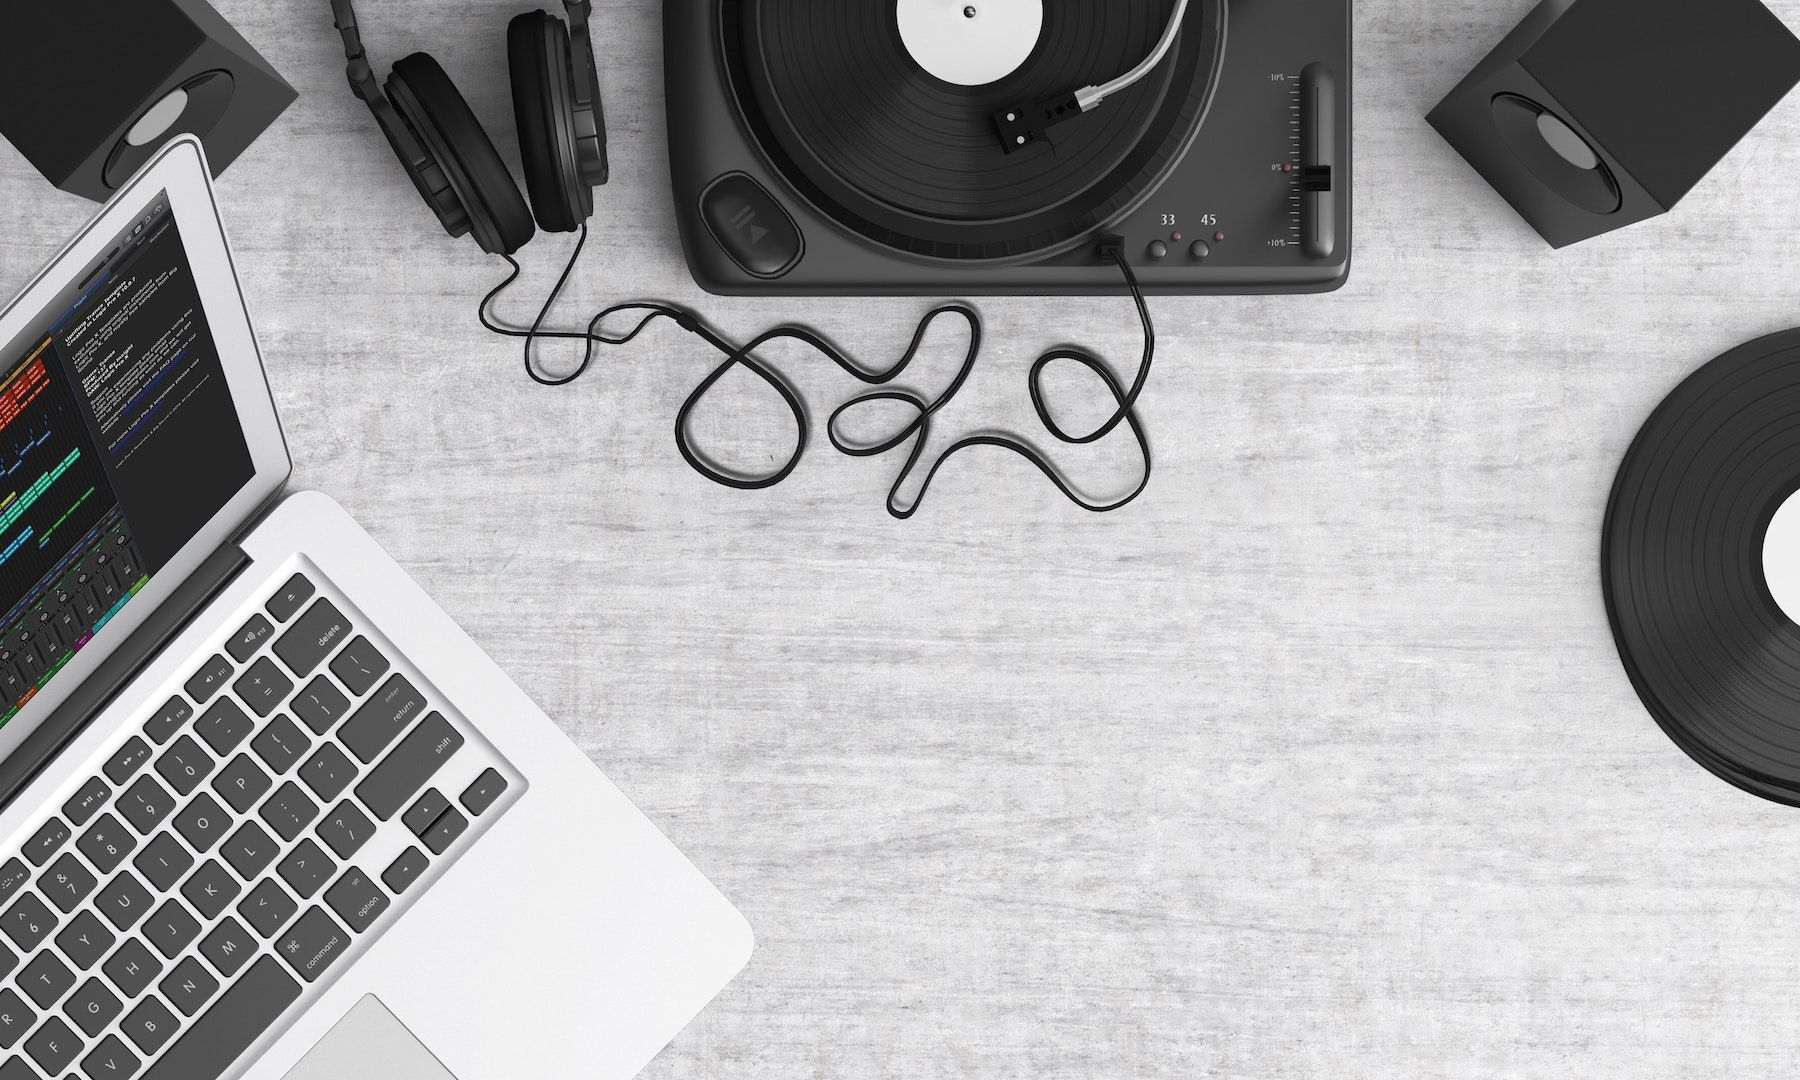 A laptop, turntable, and headphones sit on a gray table.